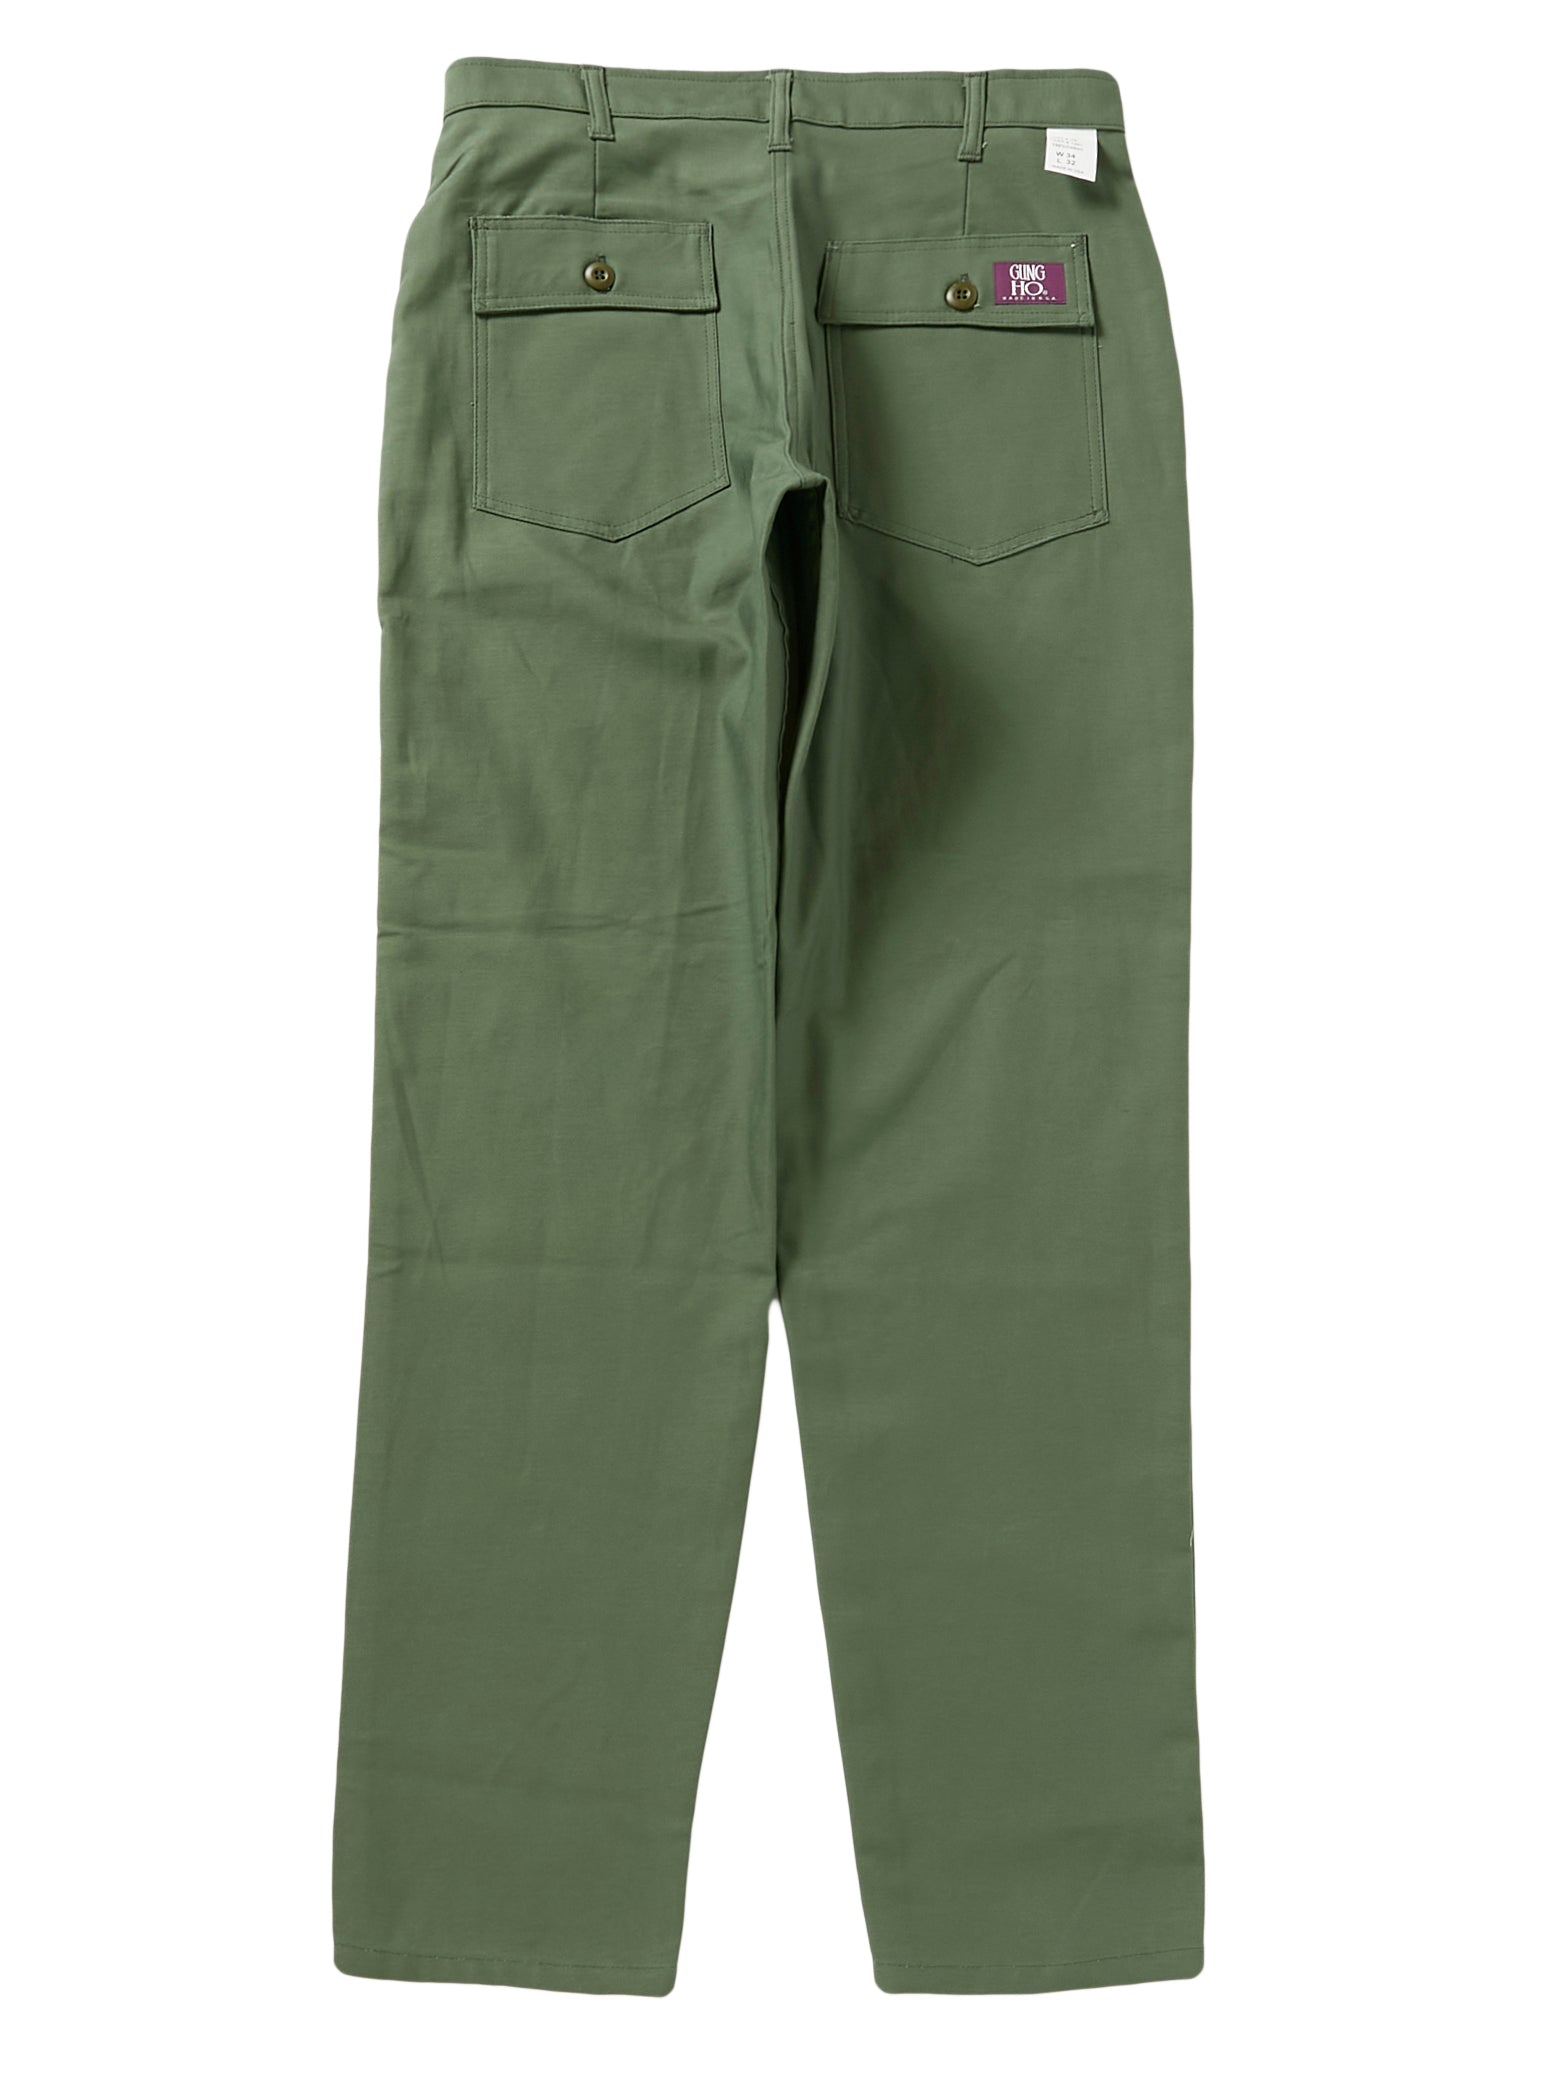 GUNGHO/ガンホー】TAPER-FIT FUTIGUE 4POCKET PANT MADE IN USA